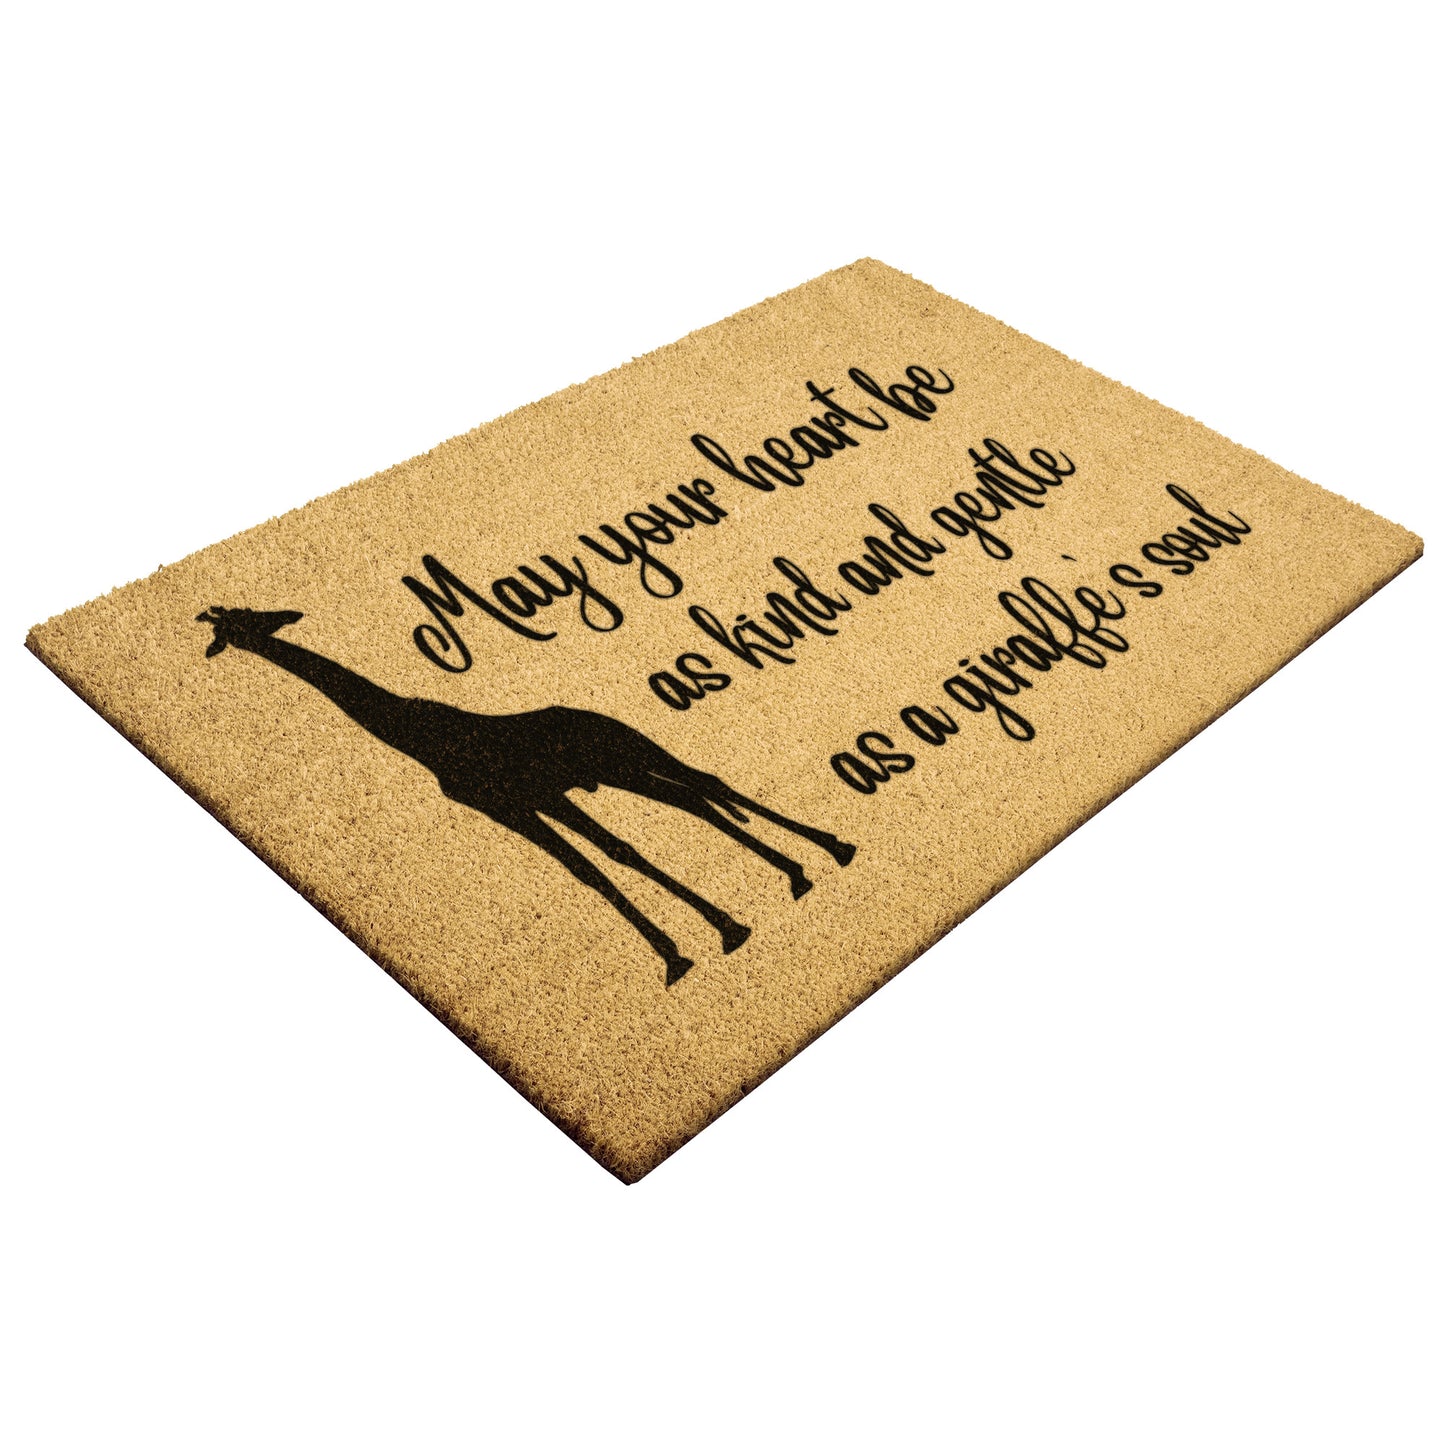 Kind Giraffe's Soul Welcome Home Mat, New House Patio Gift, Stylish Animal House Decor, Coconut Coir Mat, Durable Front Door Mat, Outdoor